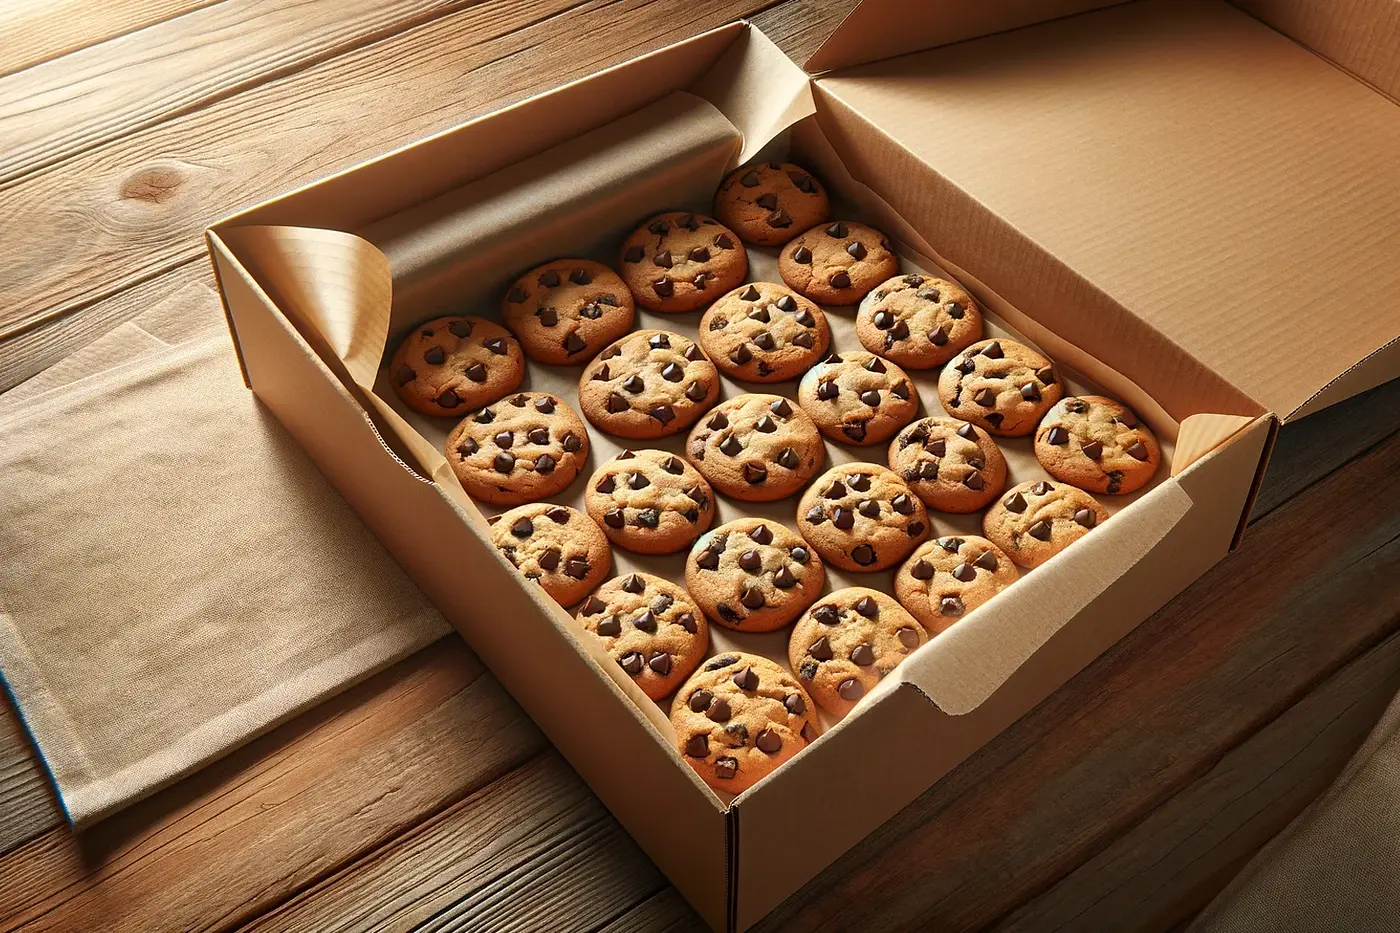 Chocolate chip cookies in a brown cardboard box.